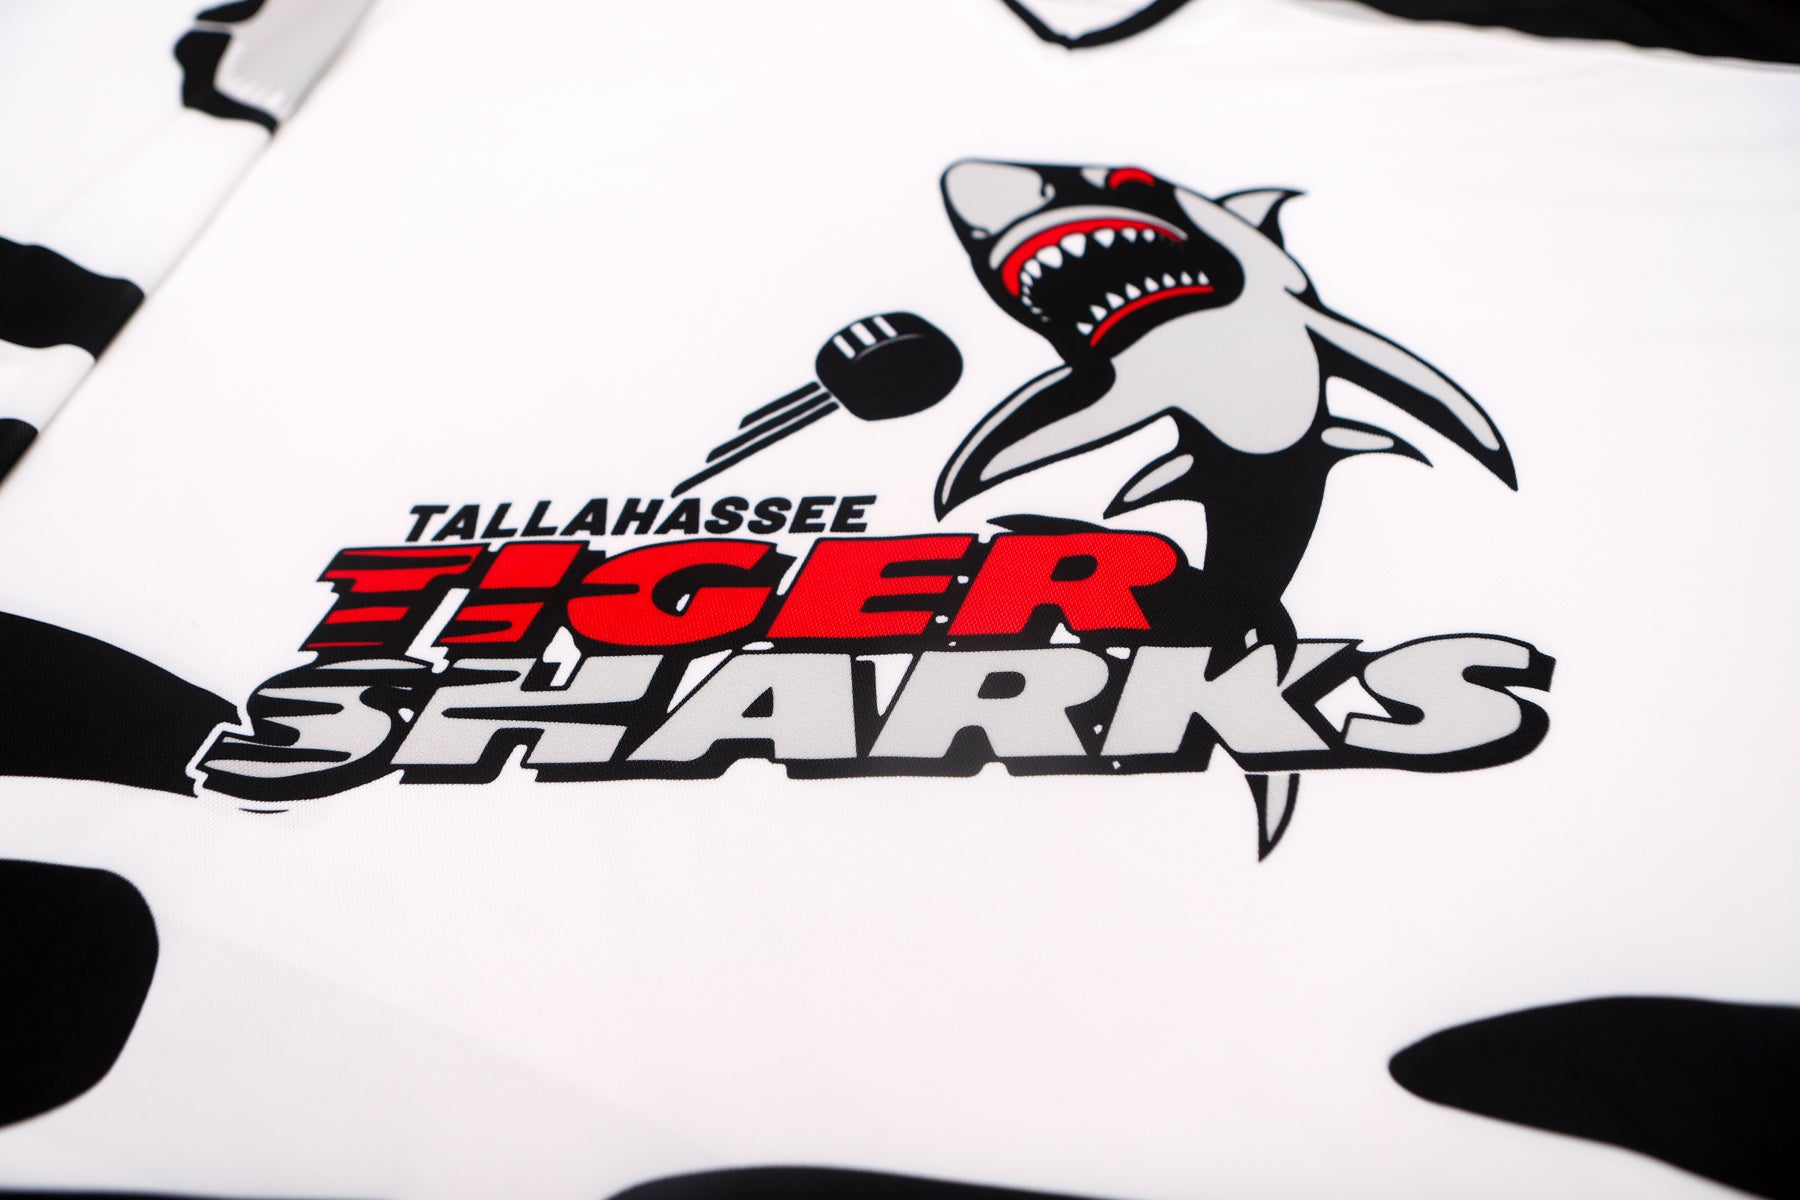 Tallahassee Tiger Sharks AHL Authentic Jersey 